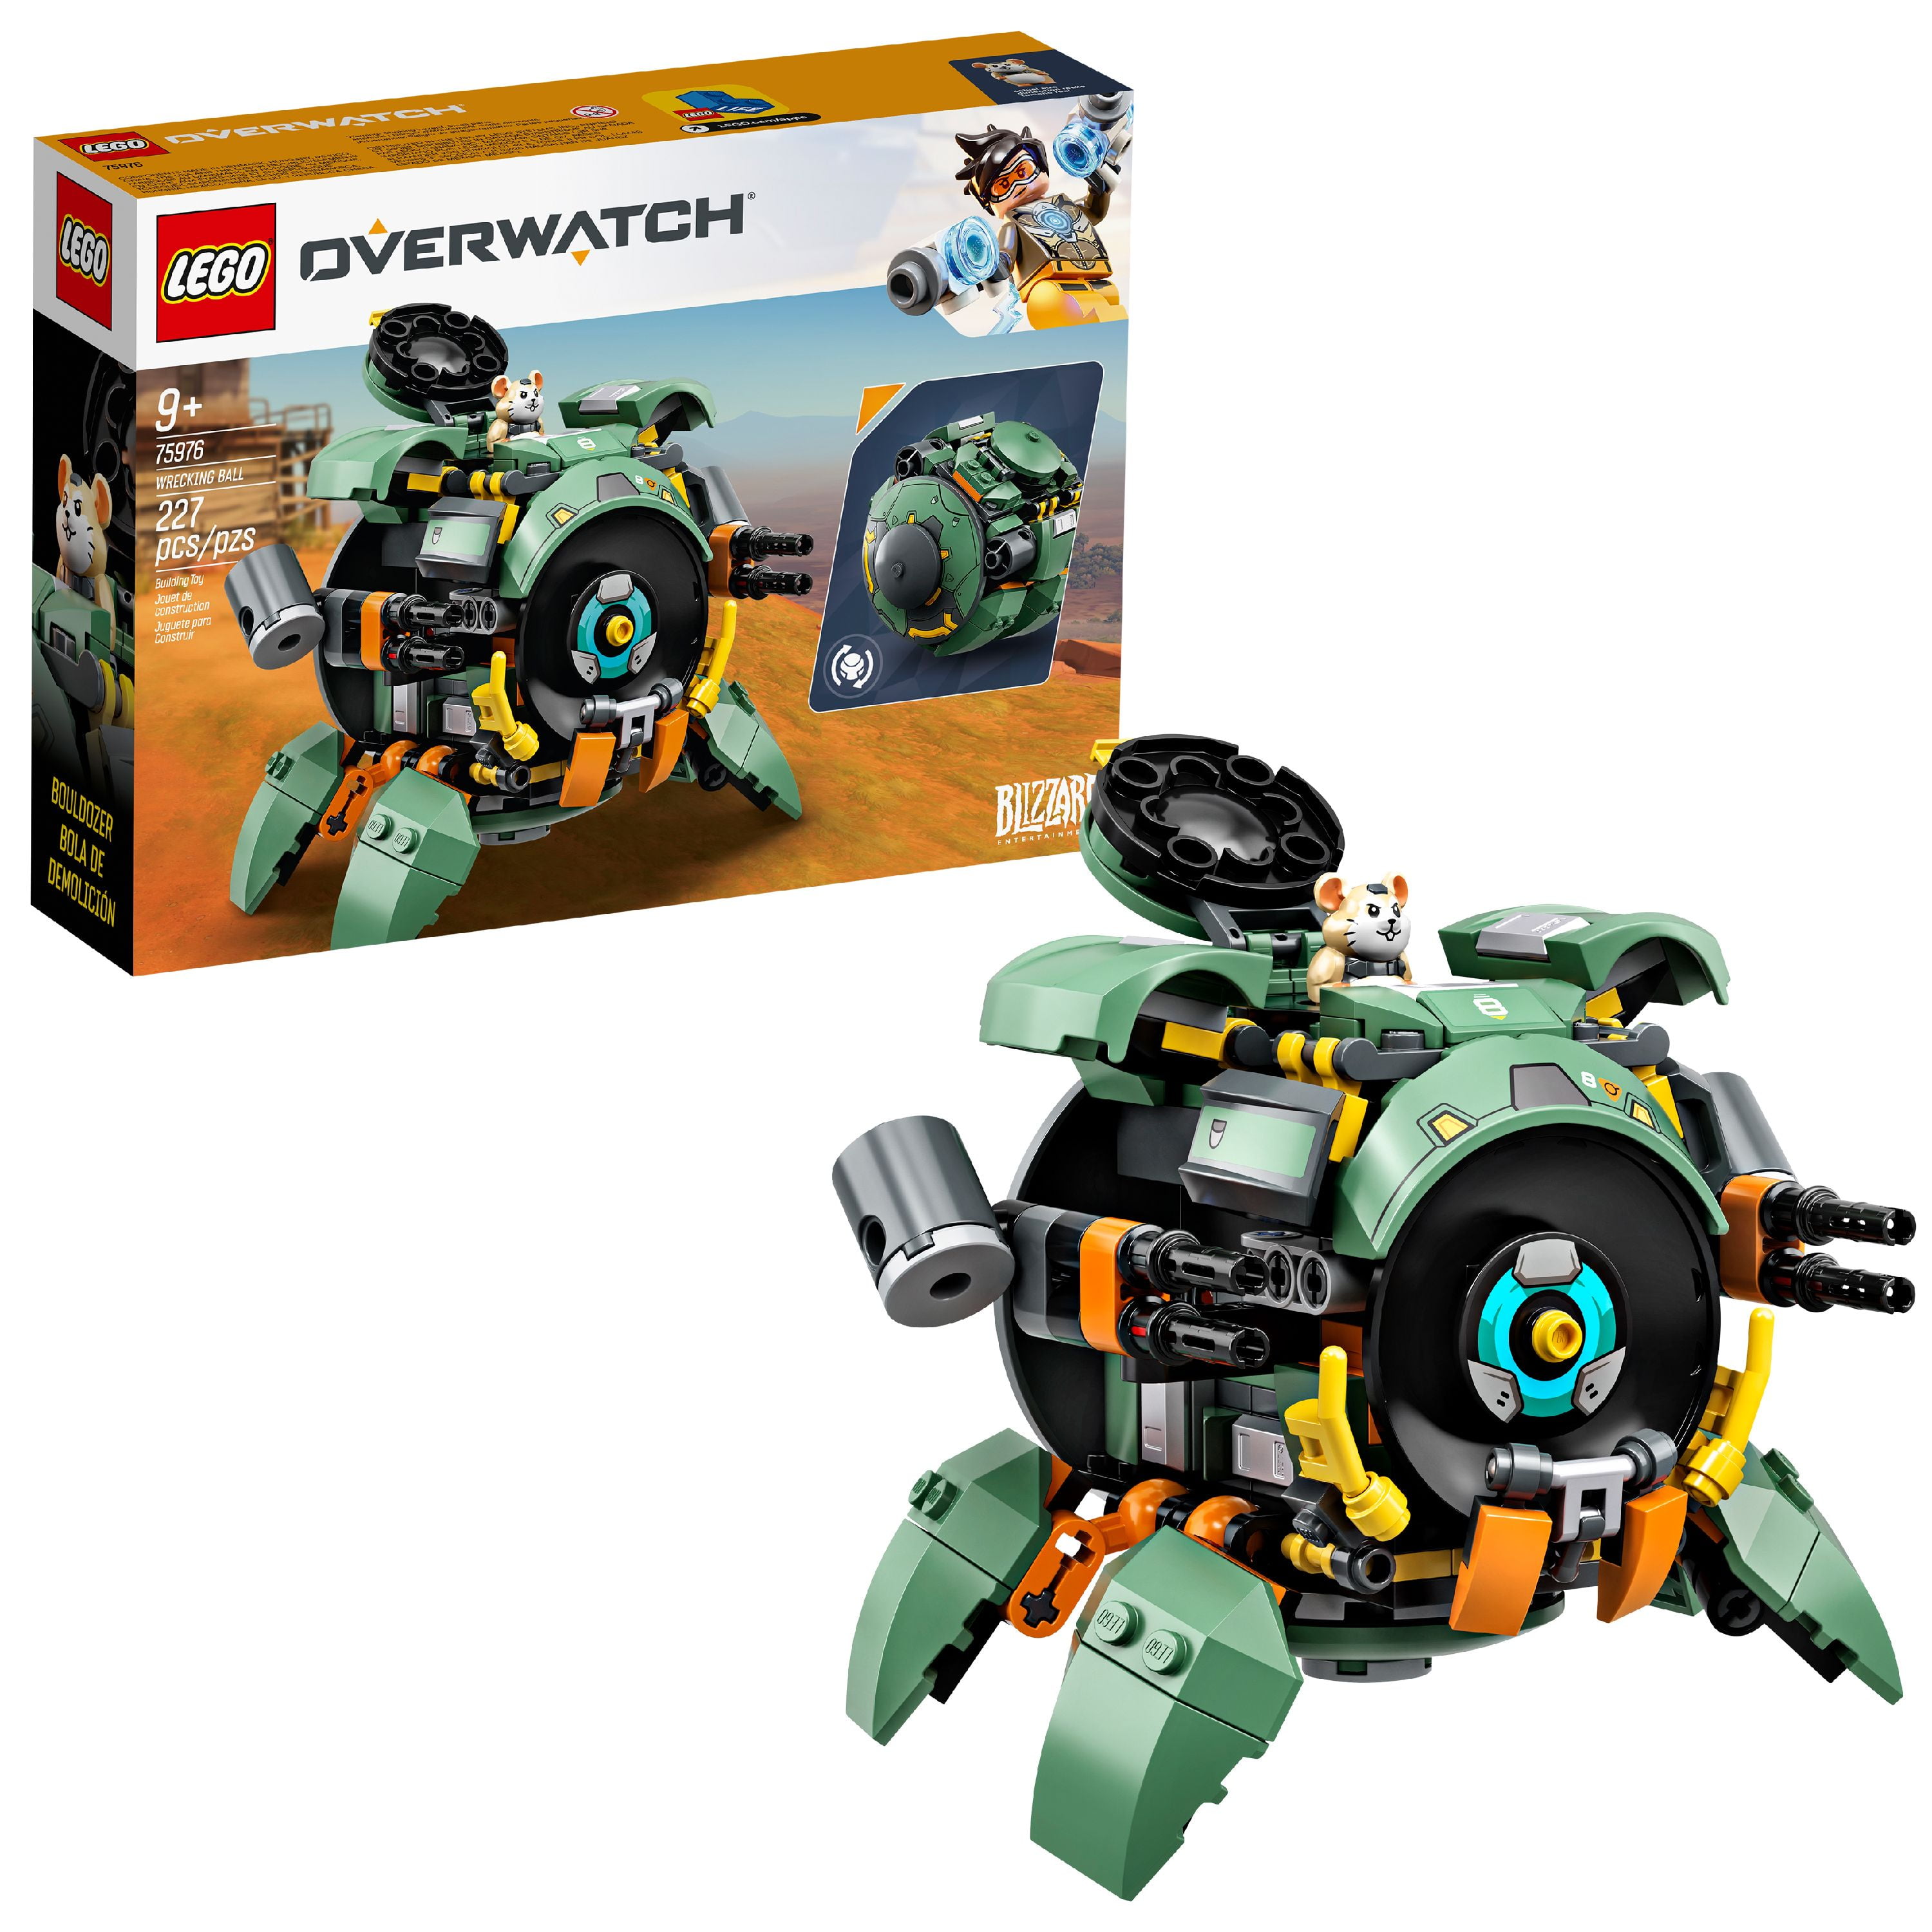 Game Robot Action Figure 75974 602 Pieces LEGO Overwatch Bastion Building Kit 